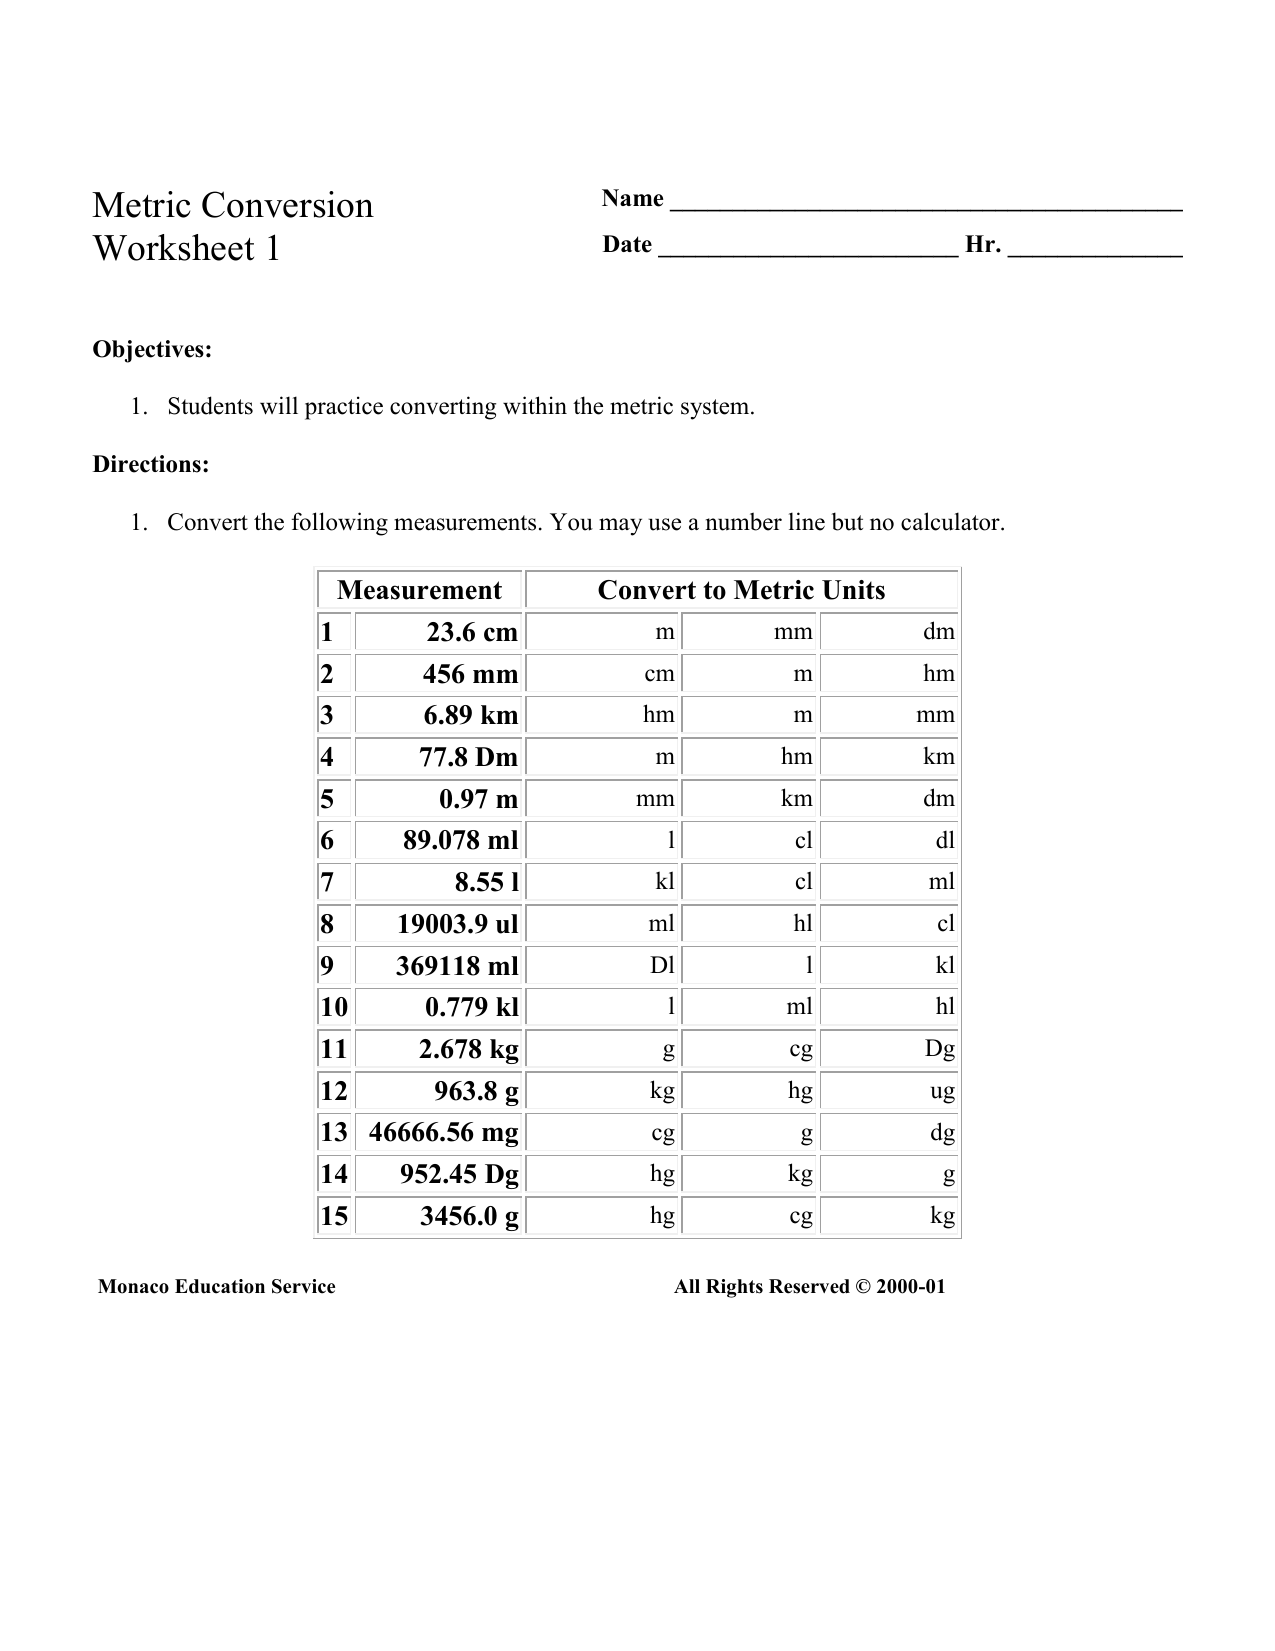 metric conversions and practice Pertaining To Metric Conversion Worksheet 1